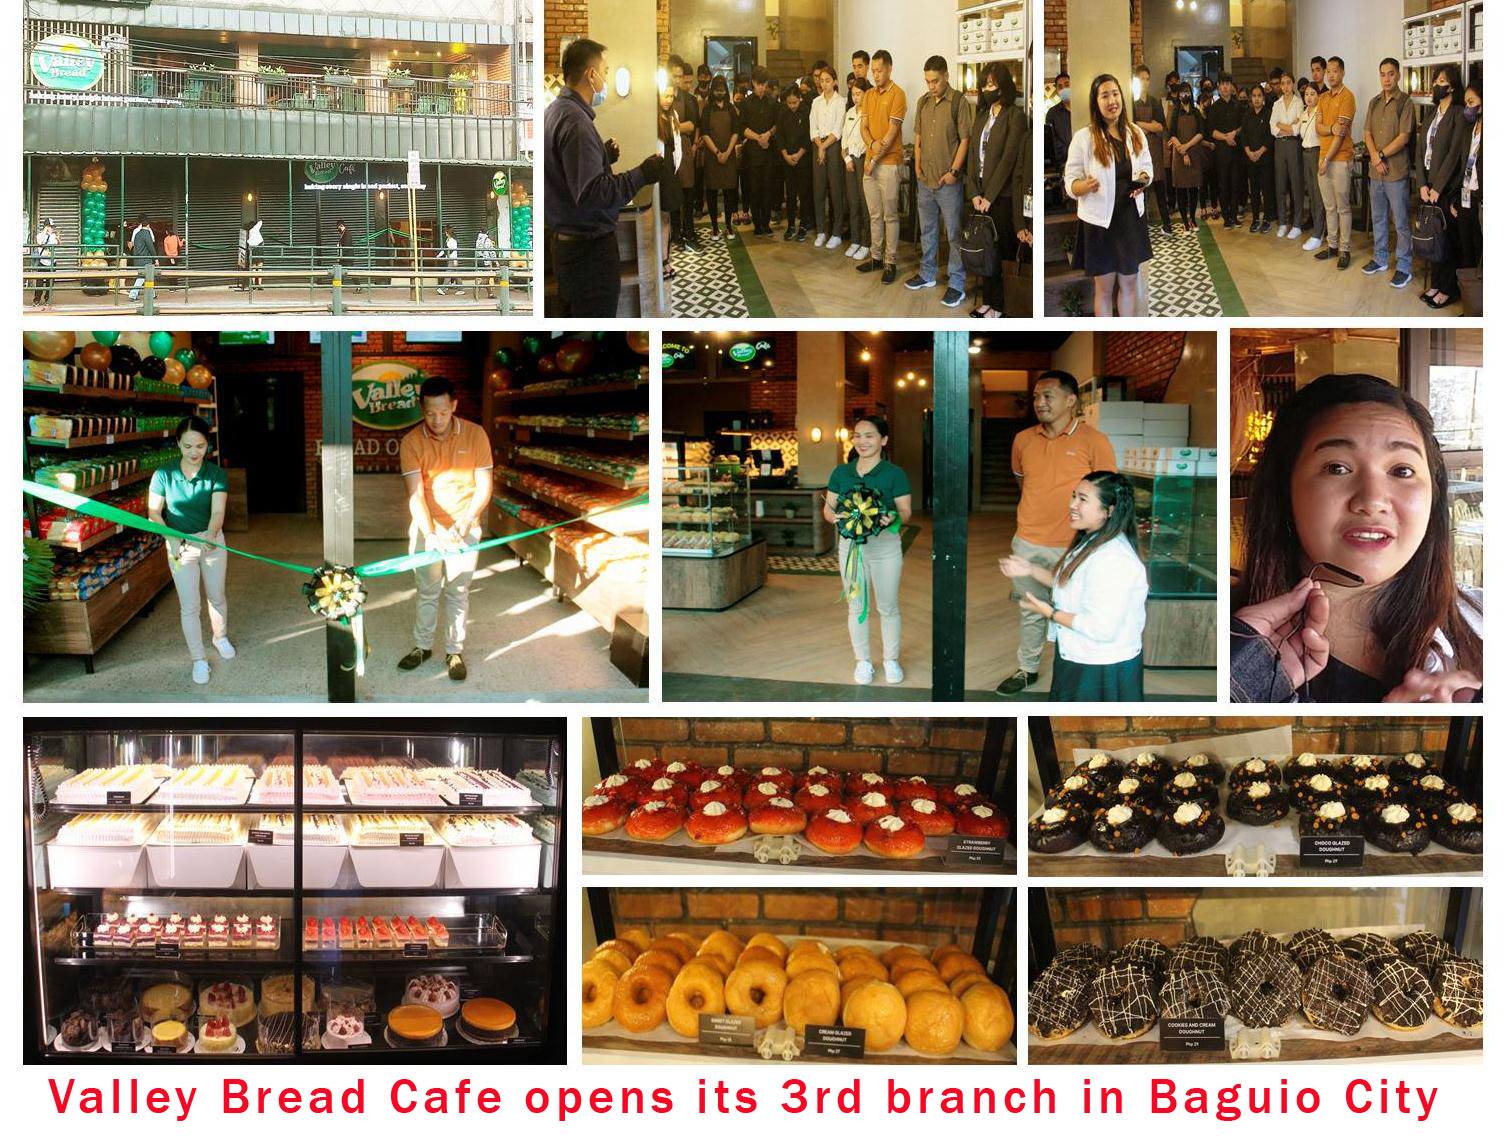 Valley Bread Café opens its 3rd branch in Baguio City